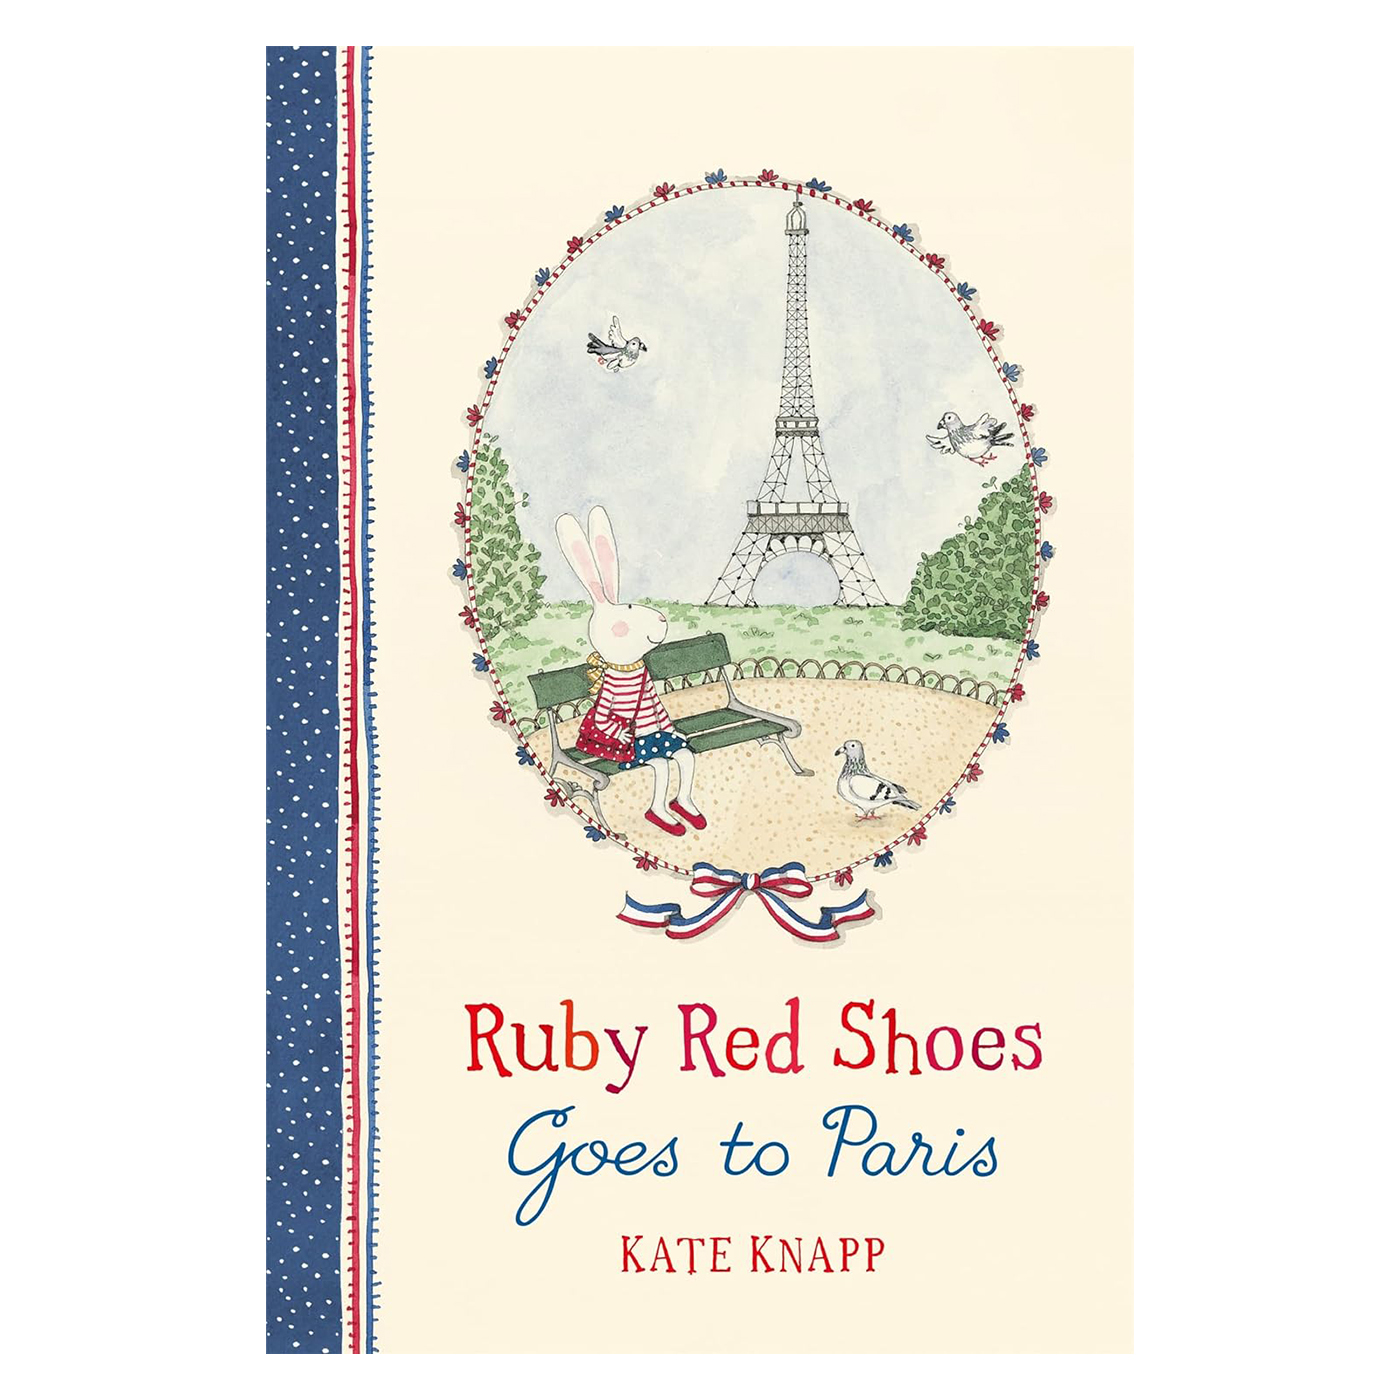  Ruby Red Shoes Goes To Paris